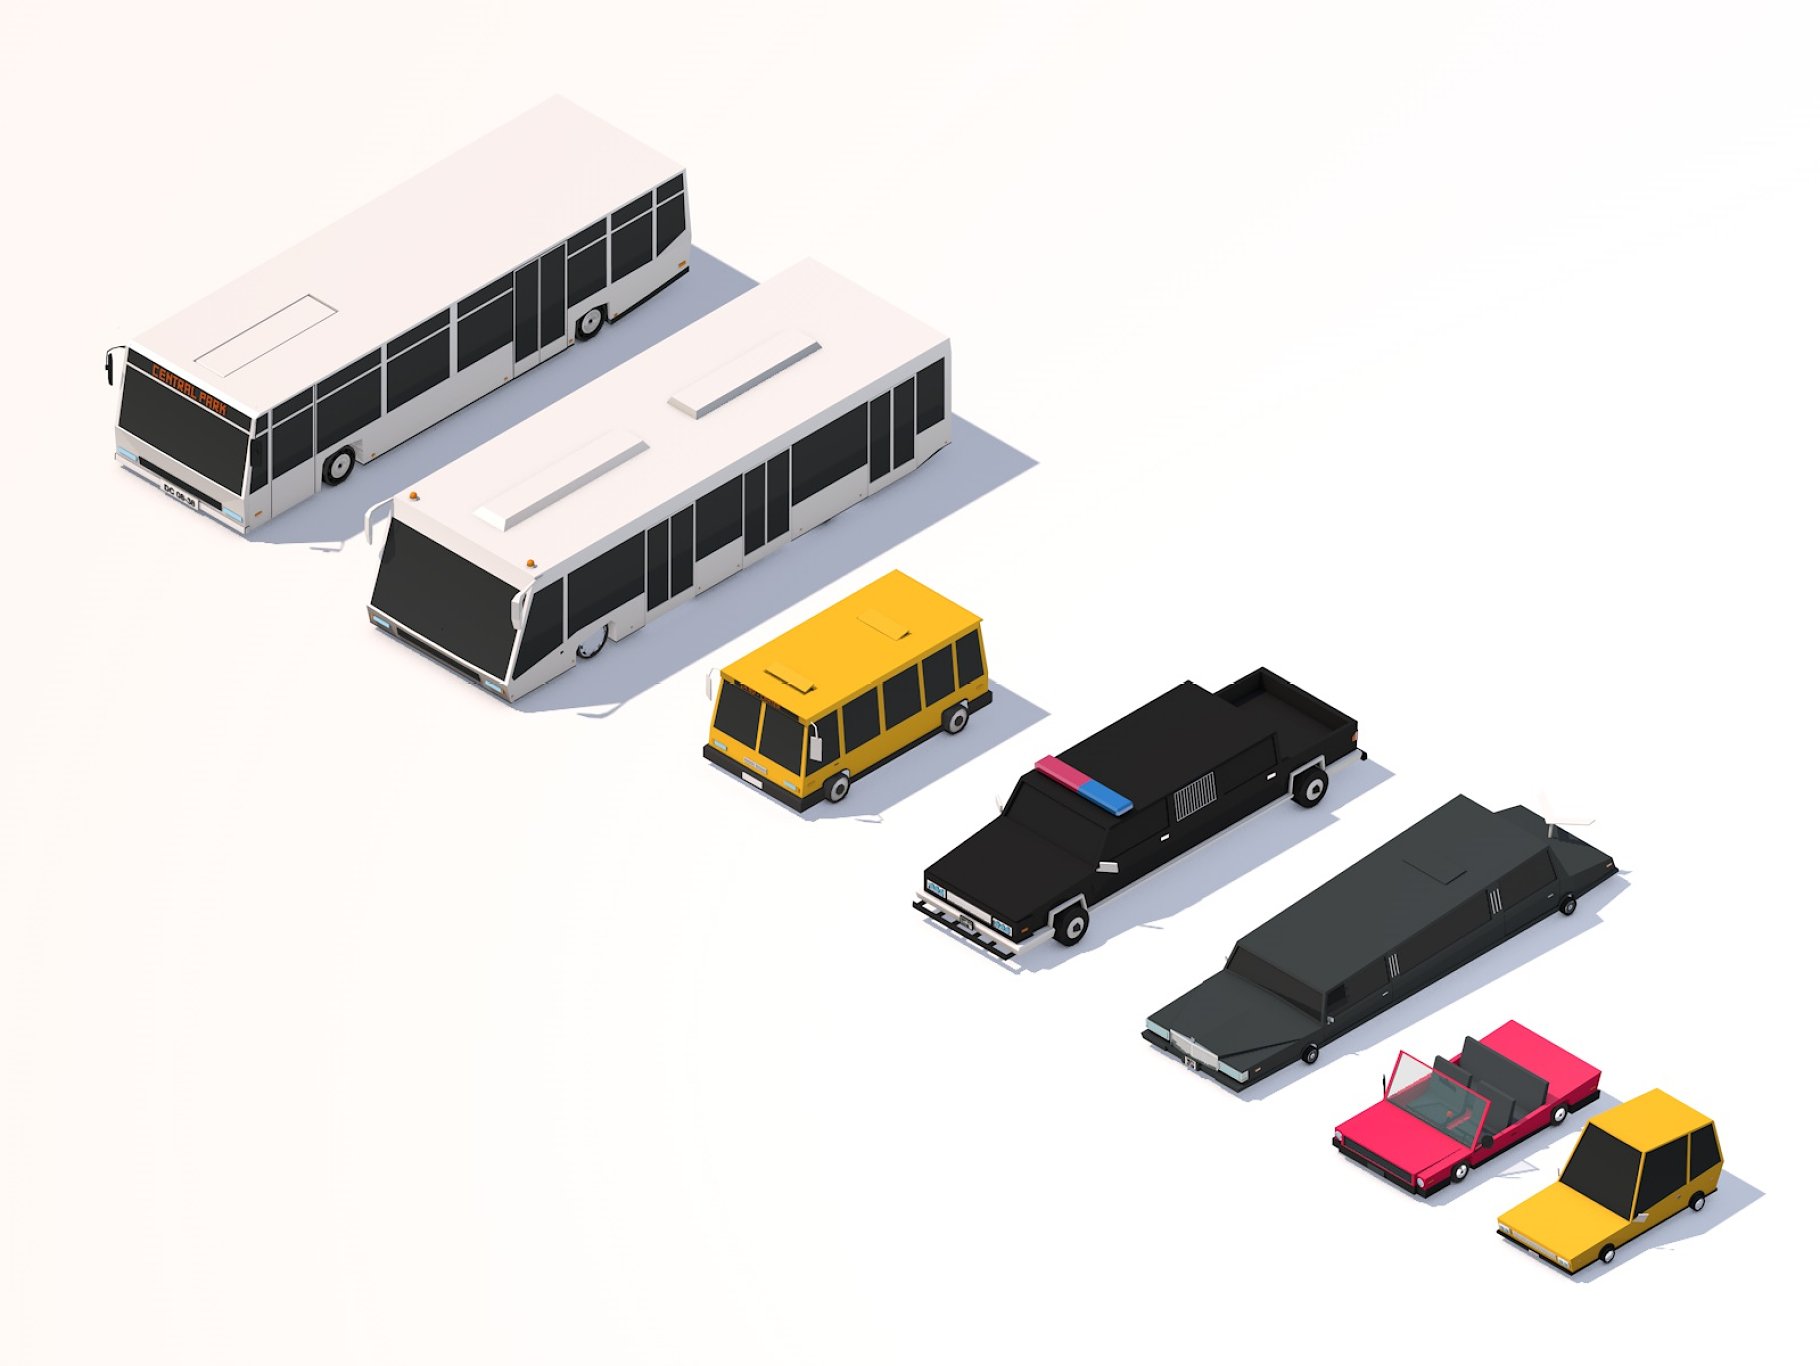 Low poly city cars mockup from above on a white background.